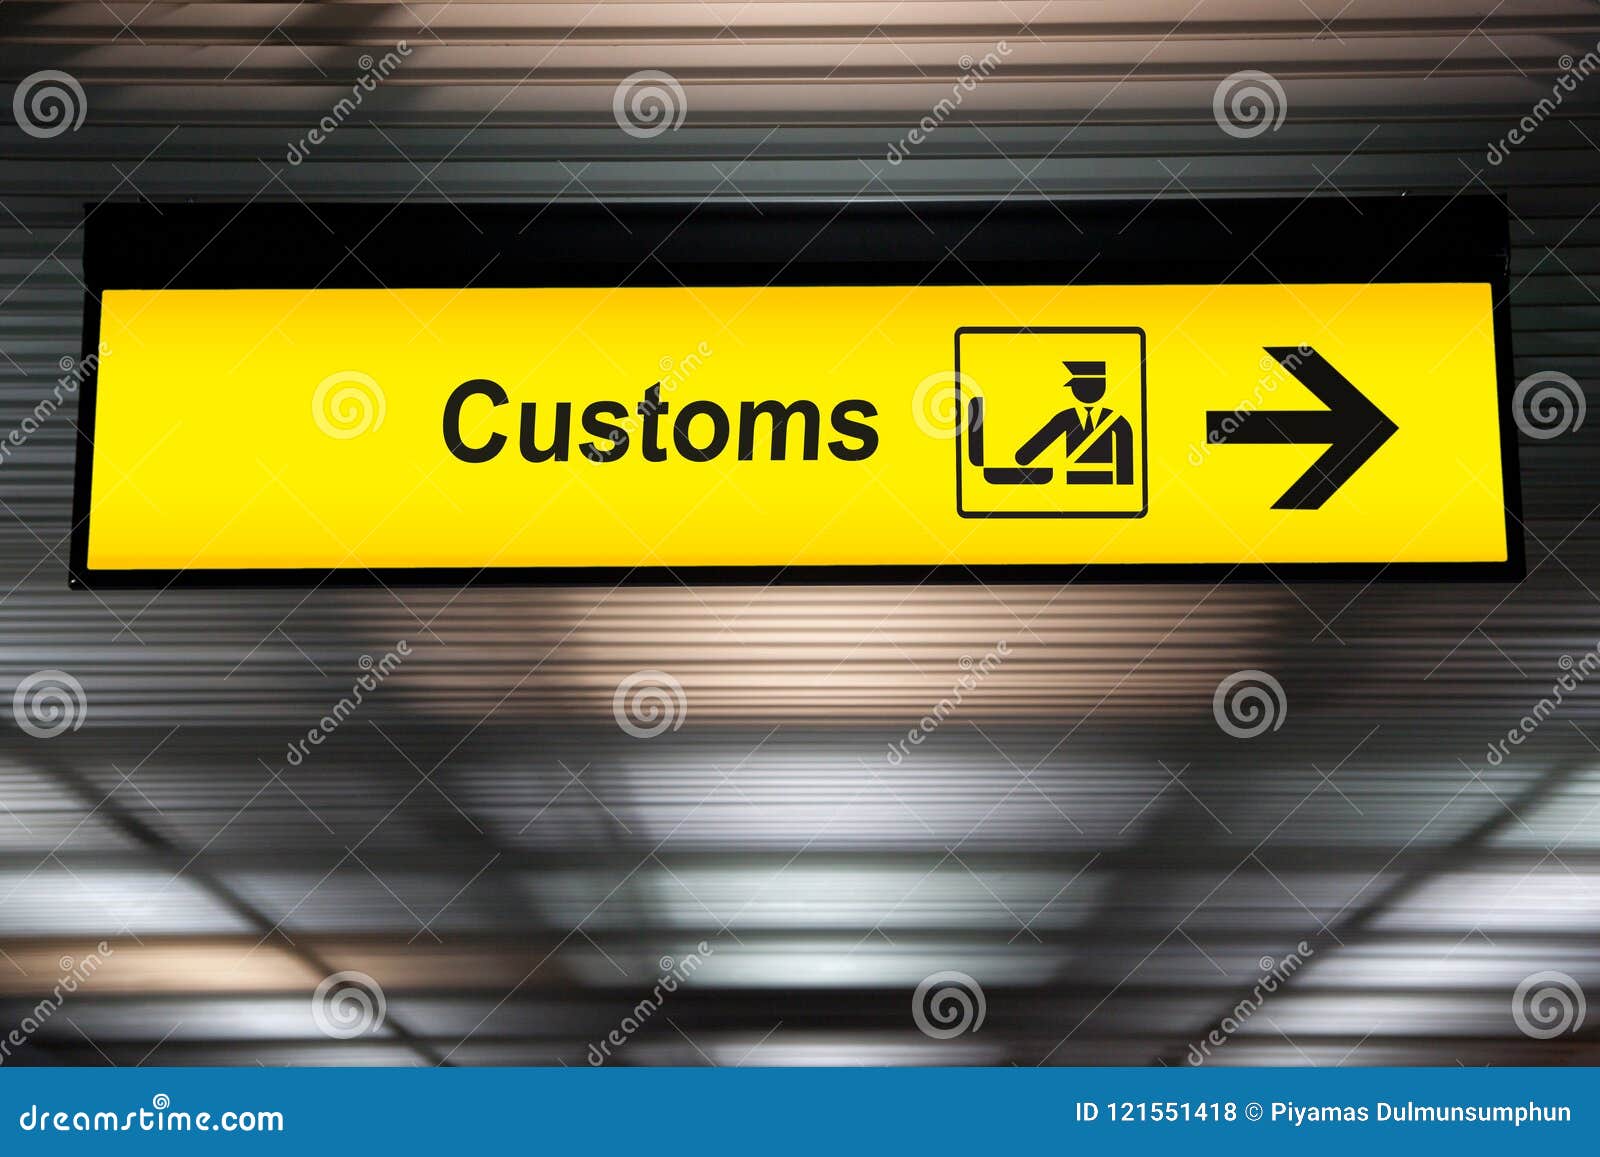 airport customs declare sign with icon and arrow hanging